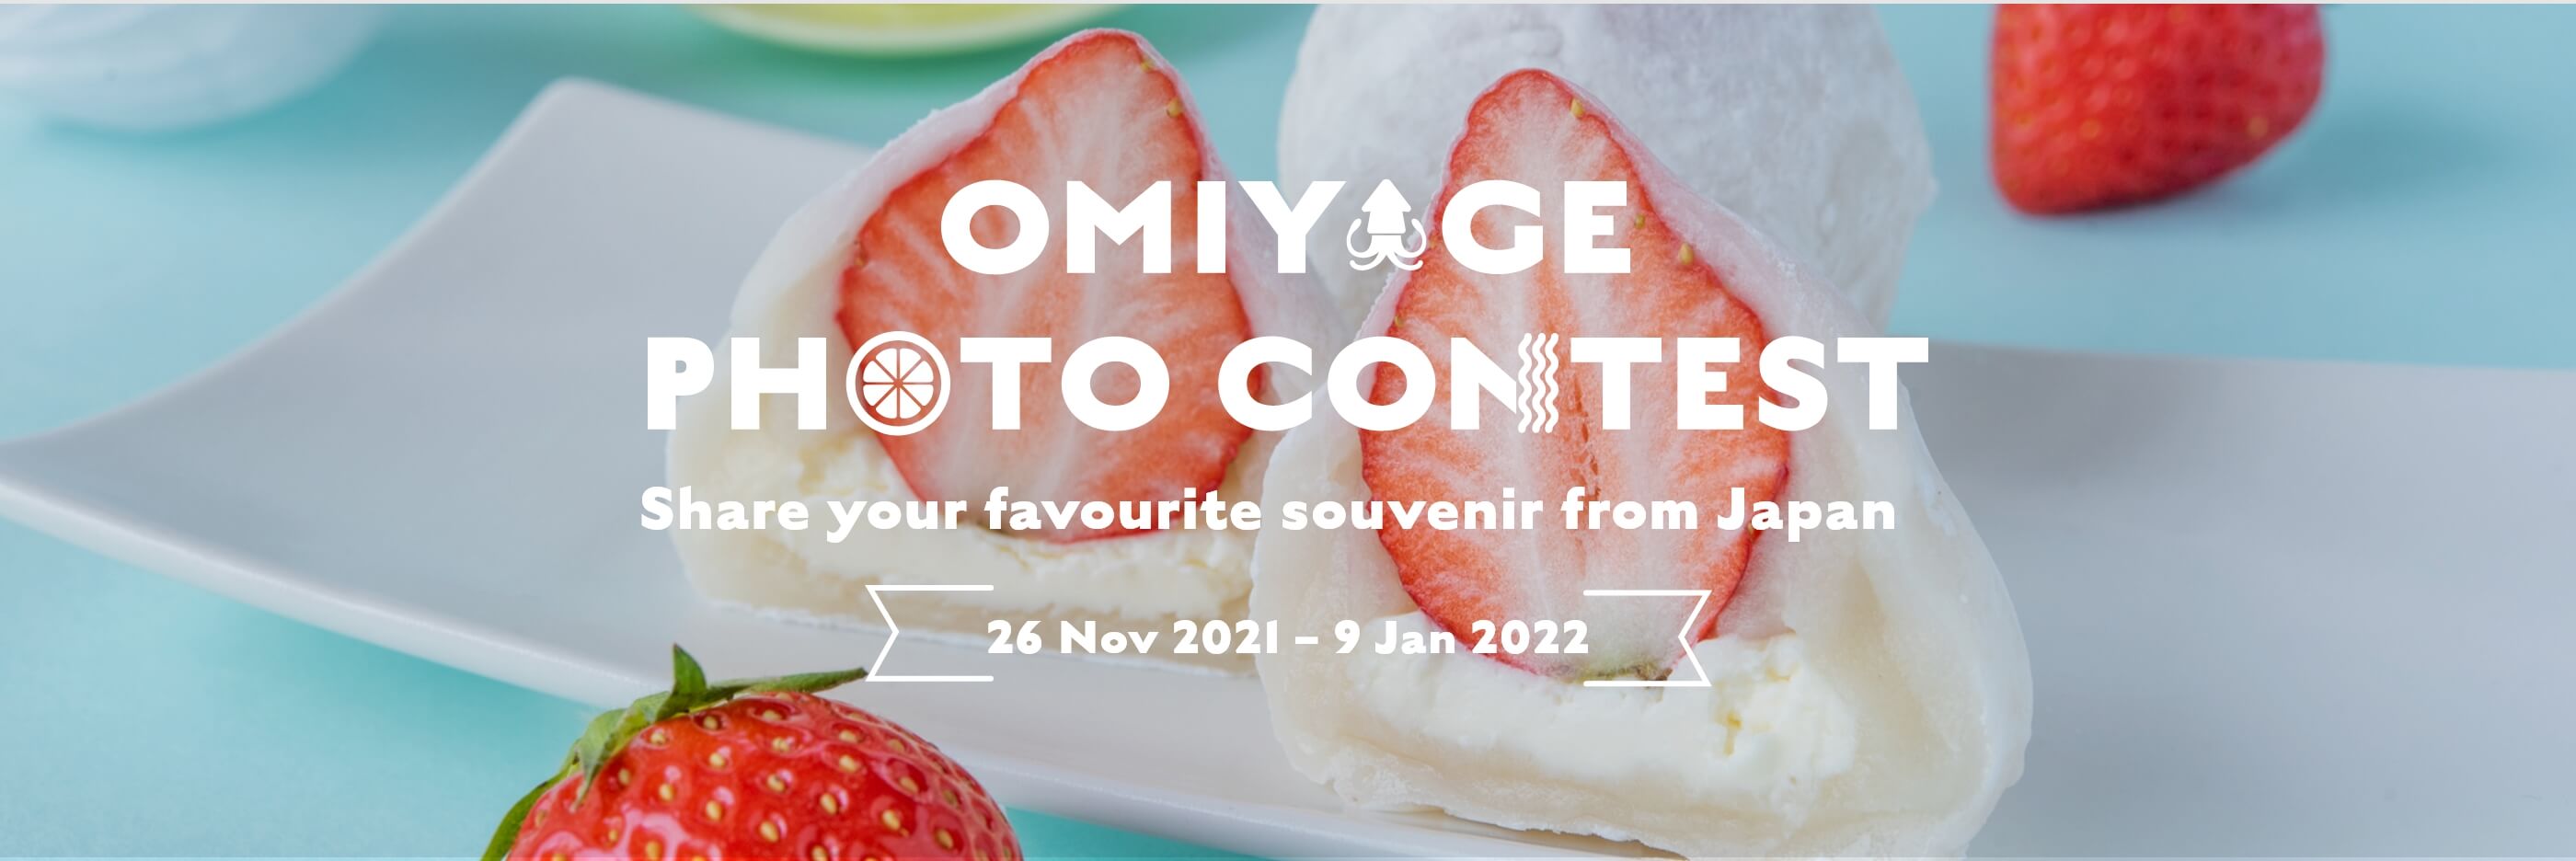 Omiyage Photo Contest Share your favourite souvenir from Japan 26 Nov, 2021 - 9 Jan, 2022